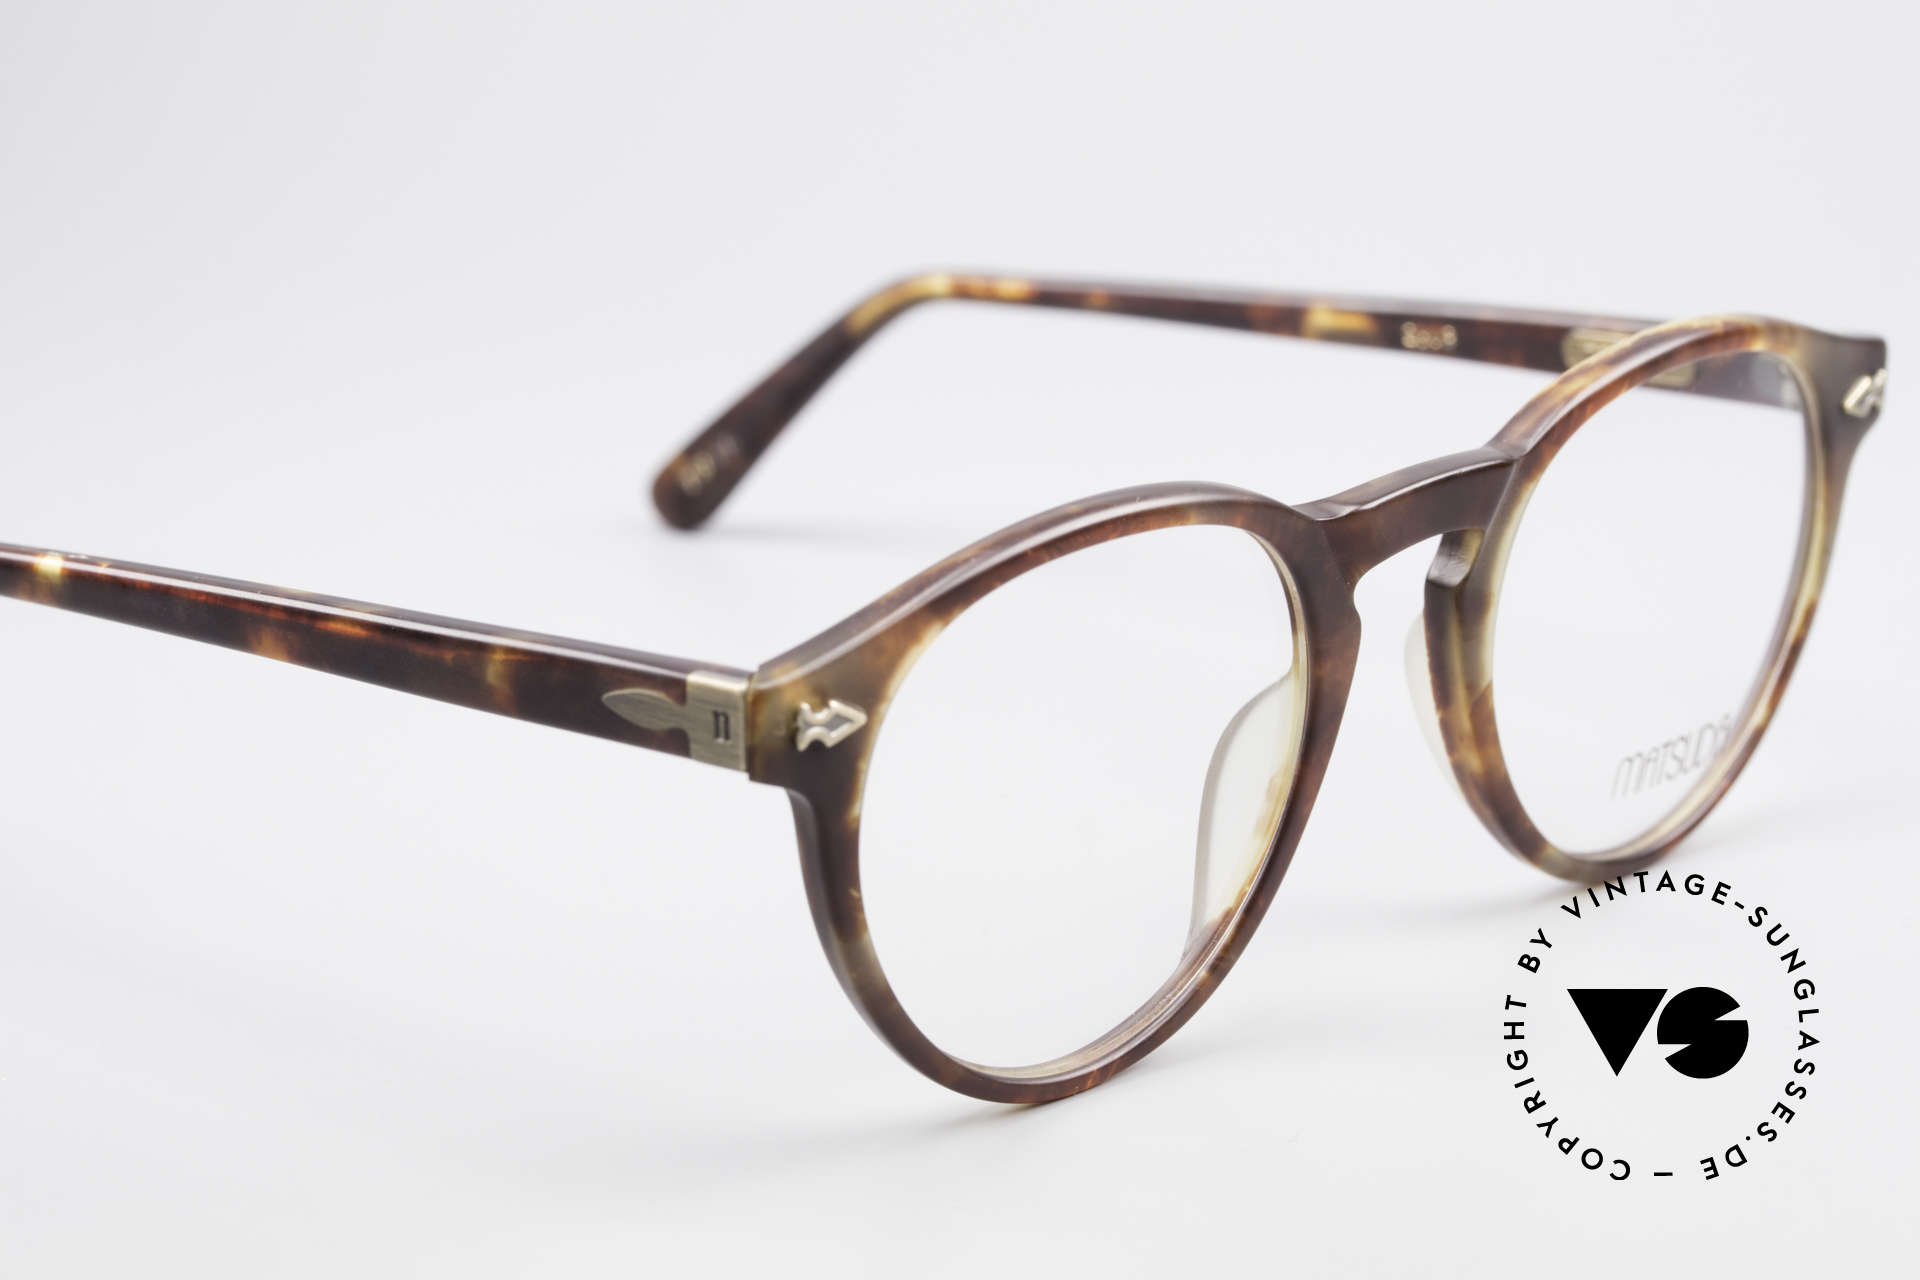 Matsuda 2303 Panto Vintage Eyeglasses, unworn rarity (a 'MUST HAVE' for all lovers of quality), Made for Men and Women